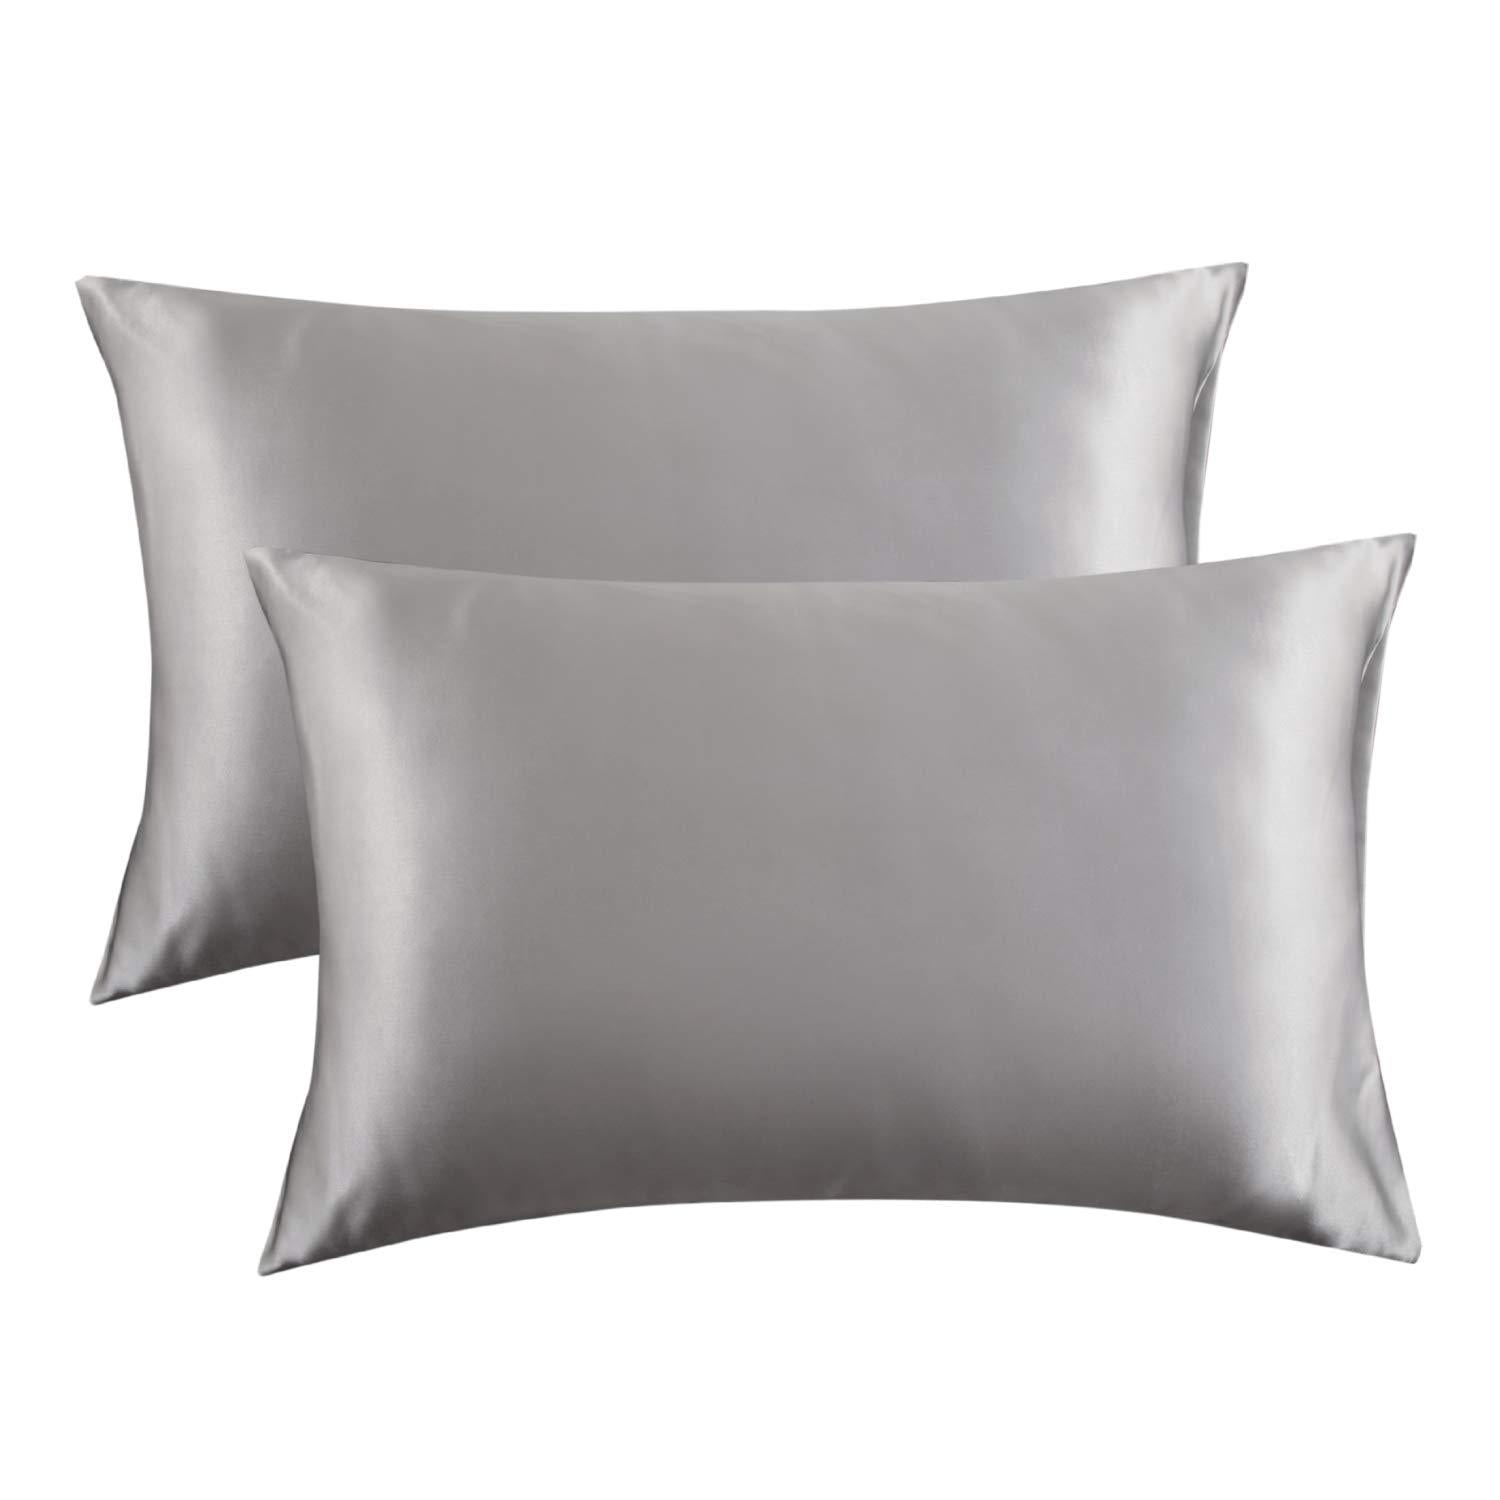 Details about   New Satin Pillow case Cover Pillowcase Standard Size Black Zippered 20x30 NWT 